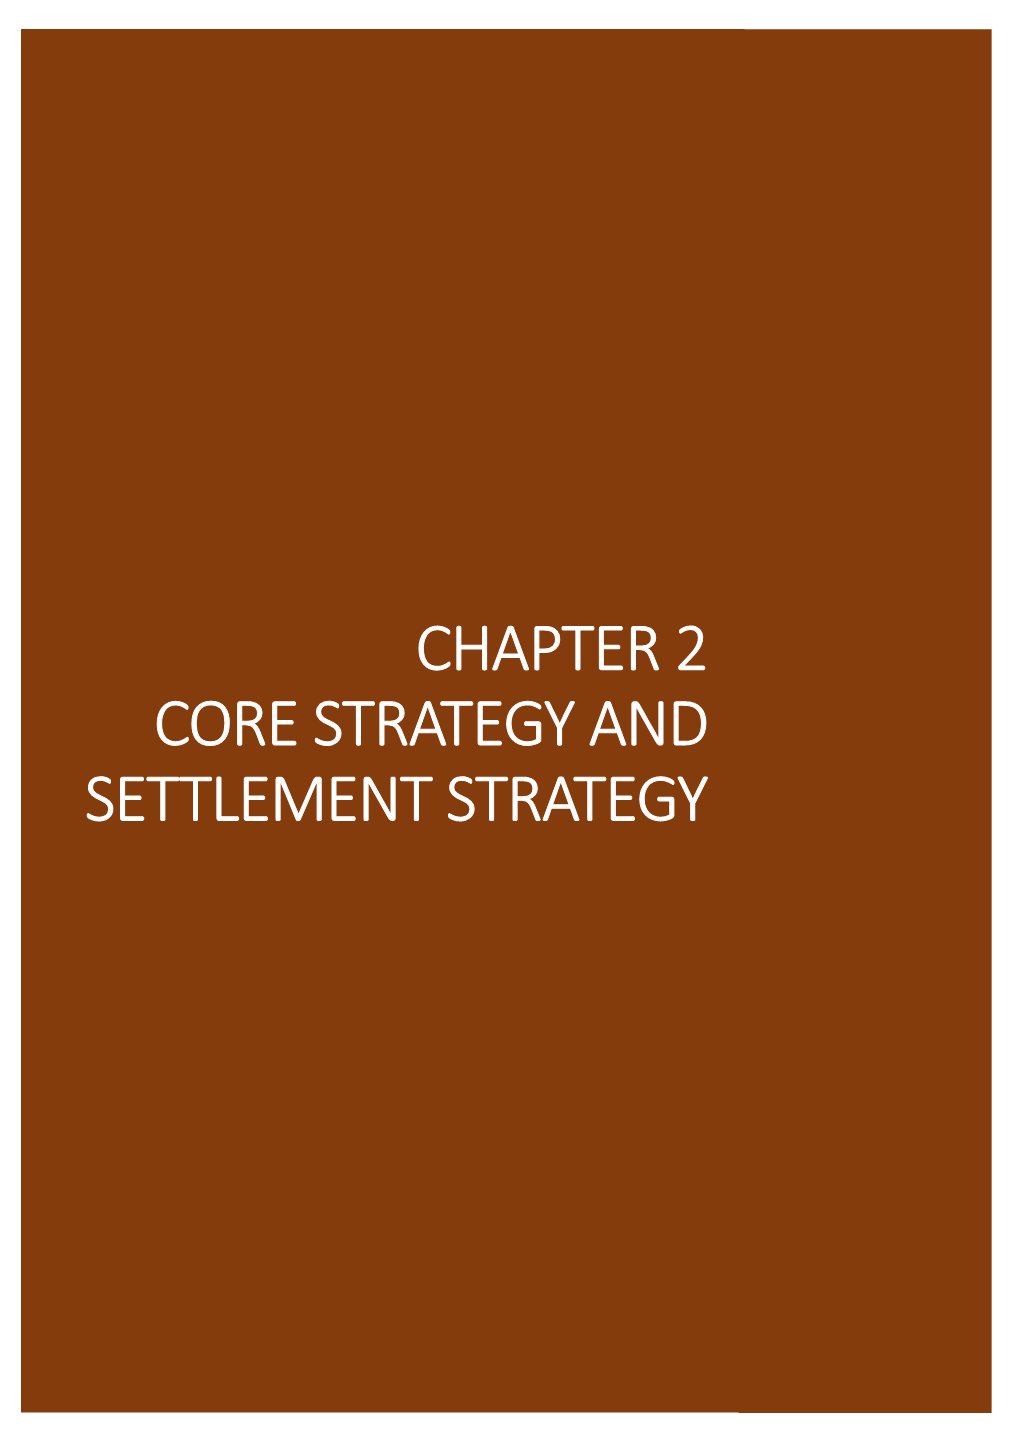 Chapter 2 Core Strategy and Settlement Strategy